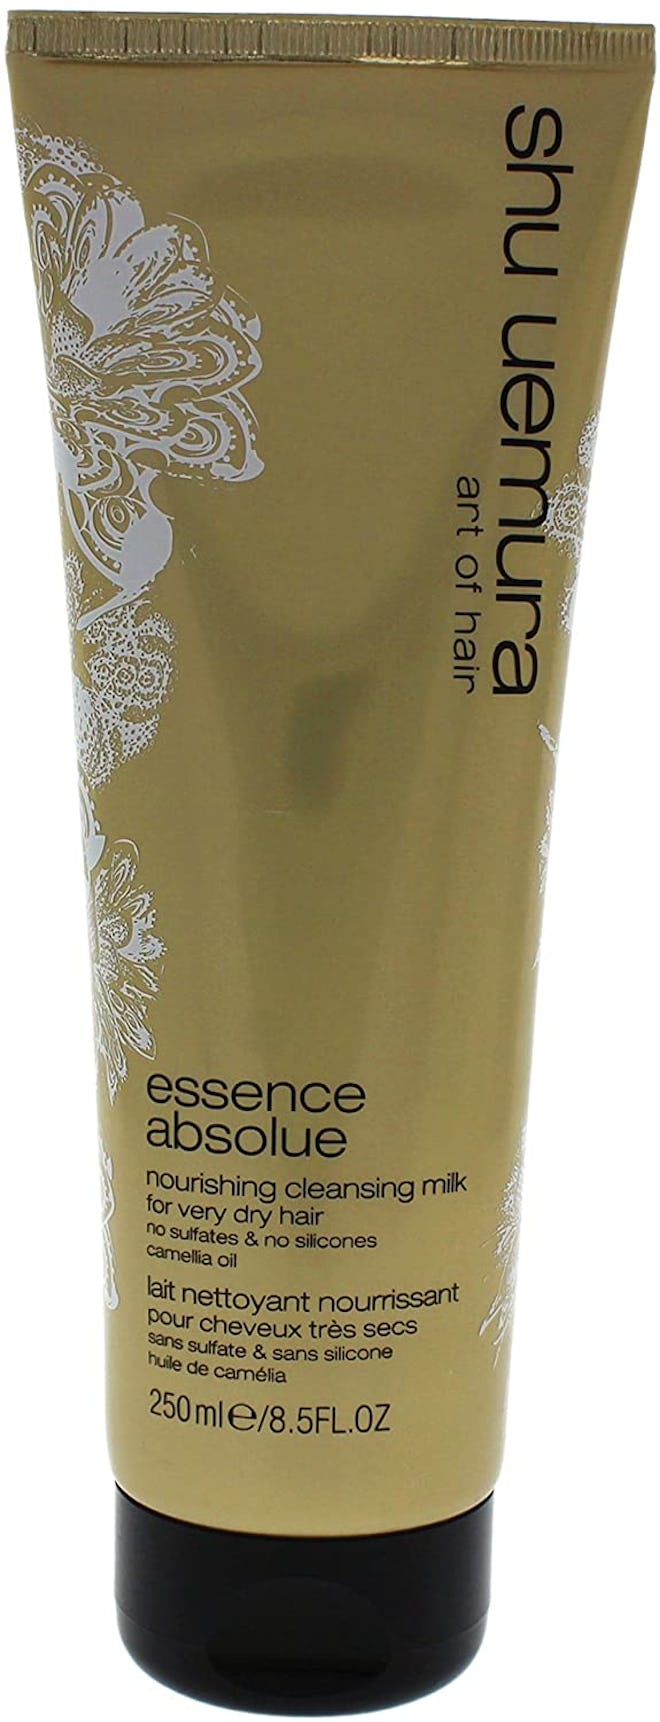 Essence Absolue Cleansing Milk Conditioner